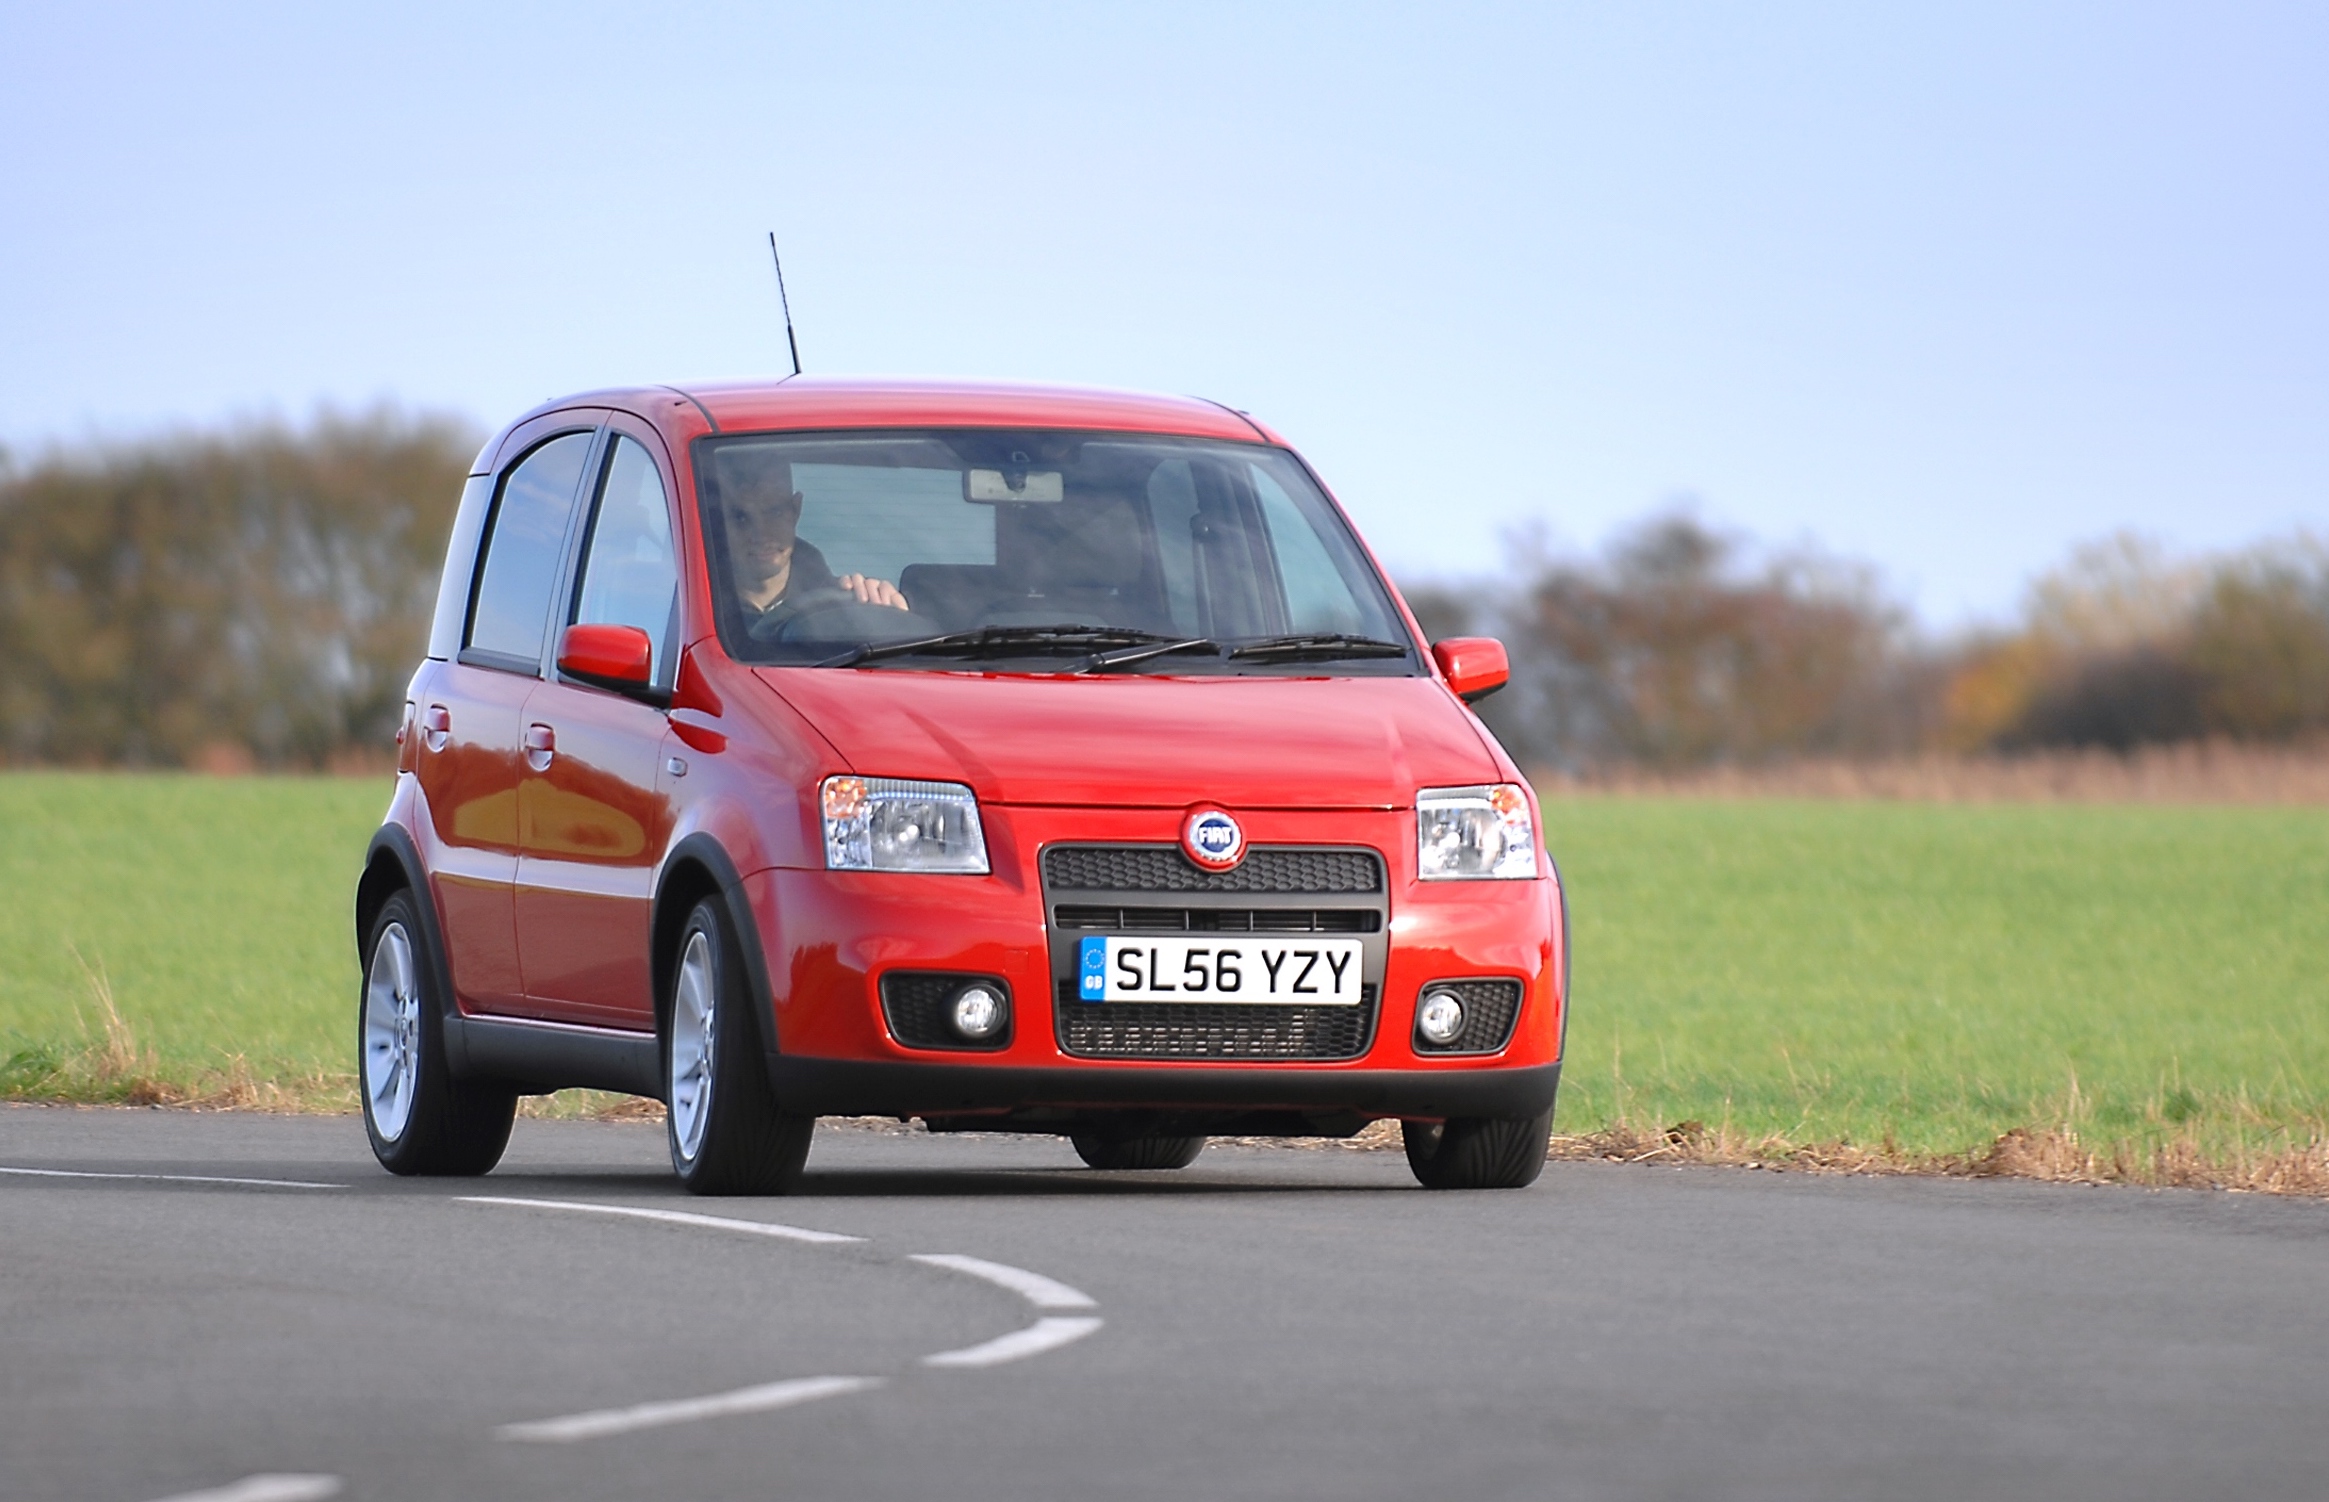 The Fiat Panda 100hp proved that outright punch didn't make a hot hatch great